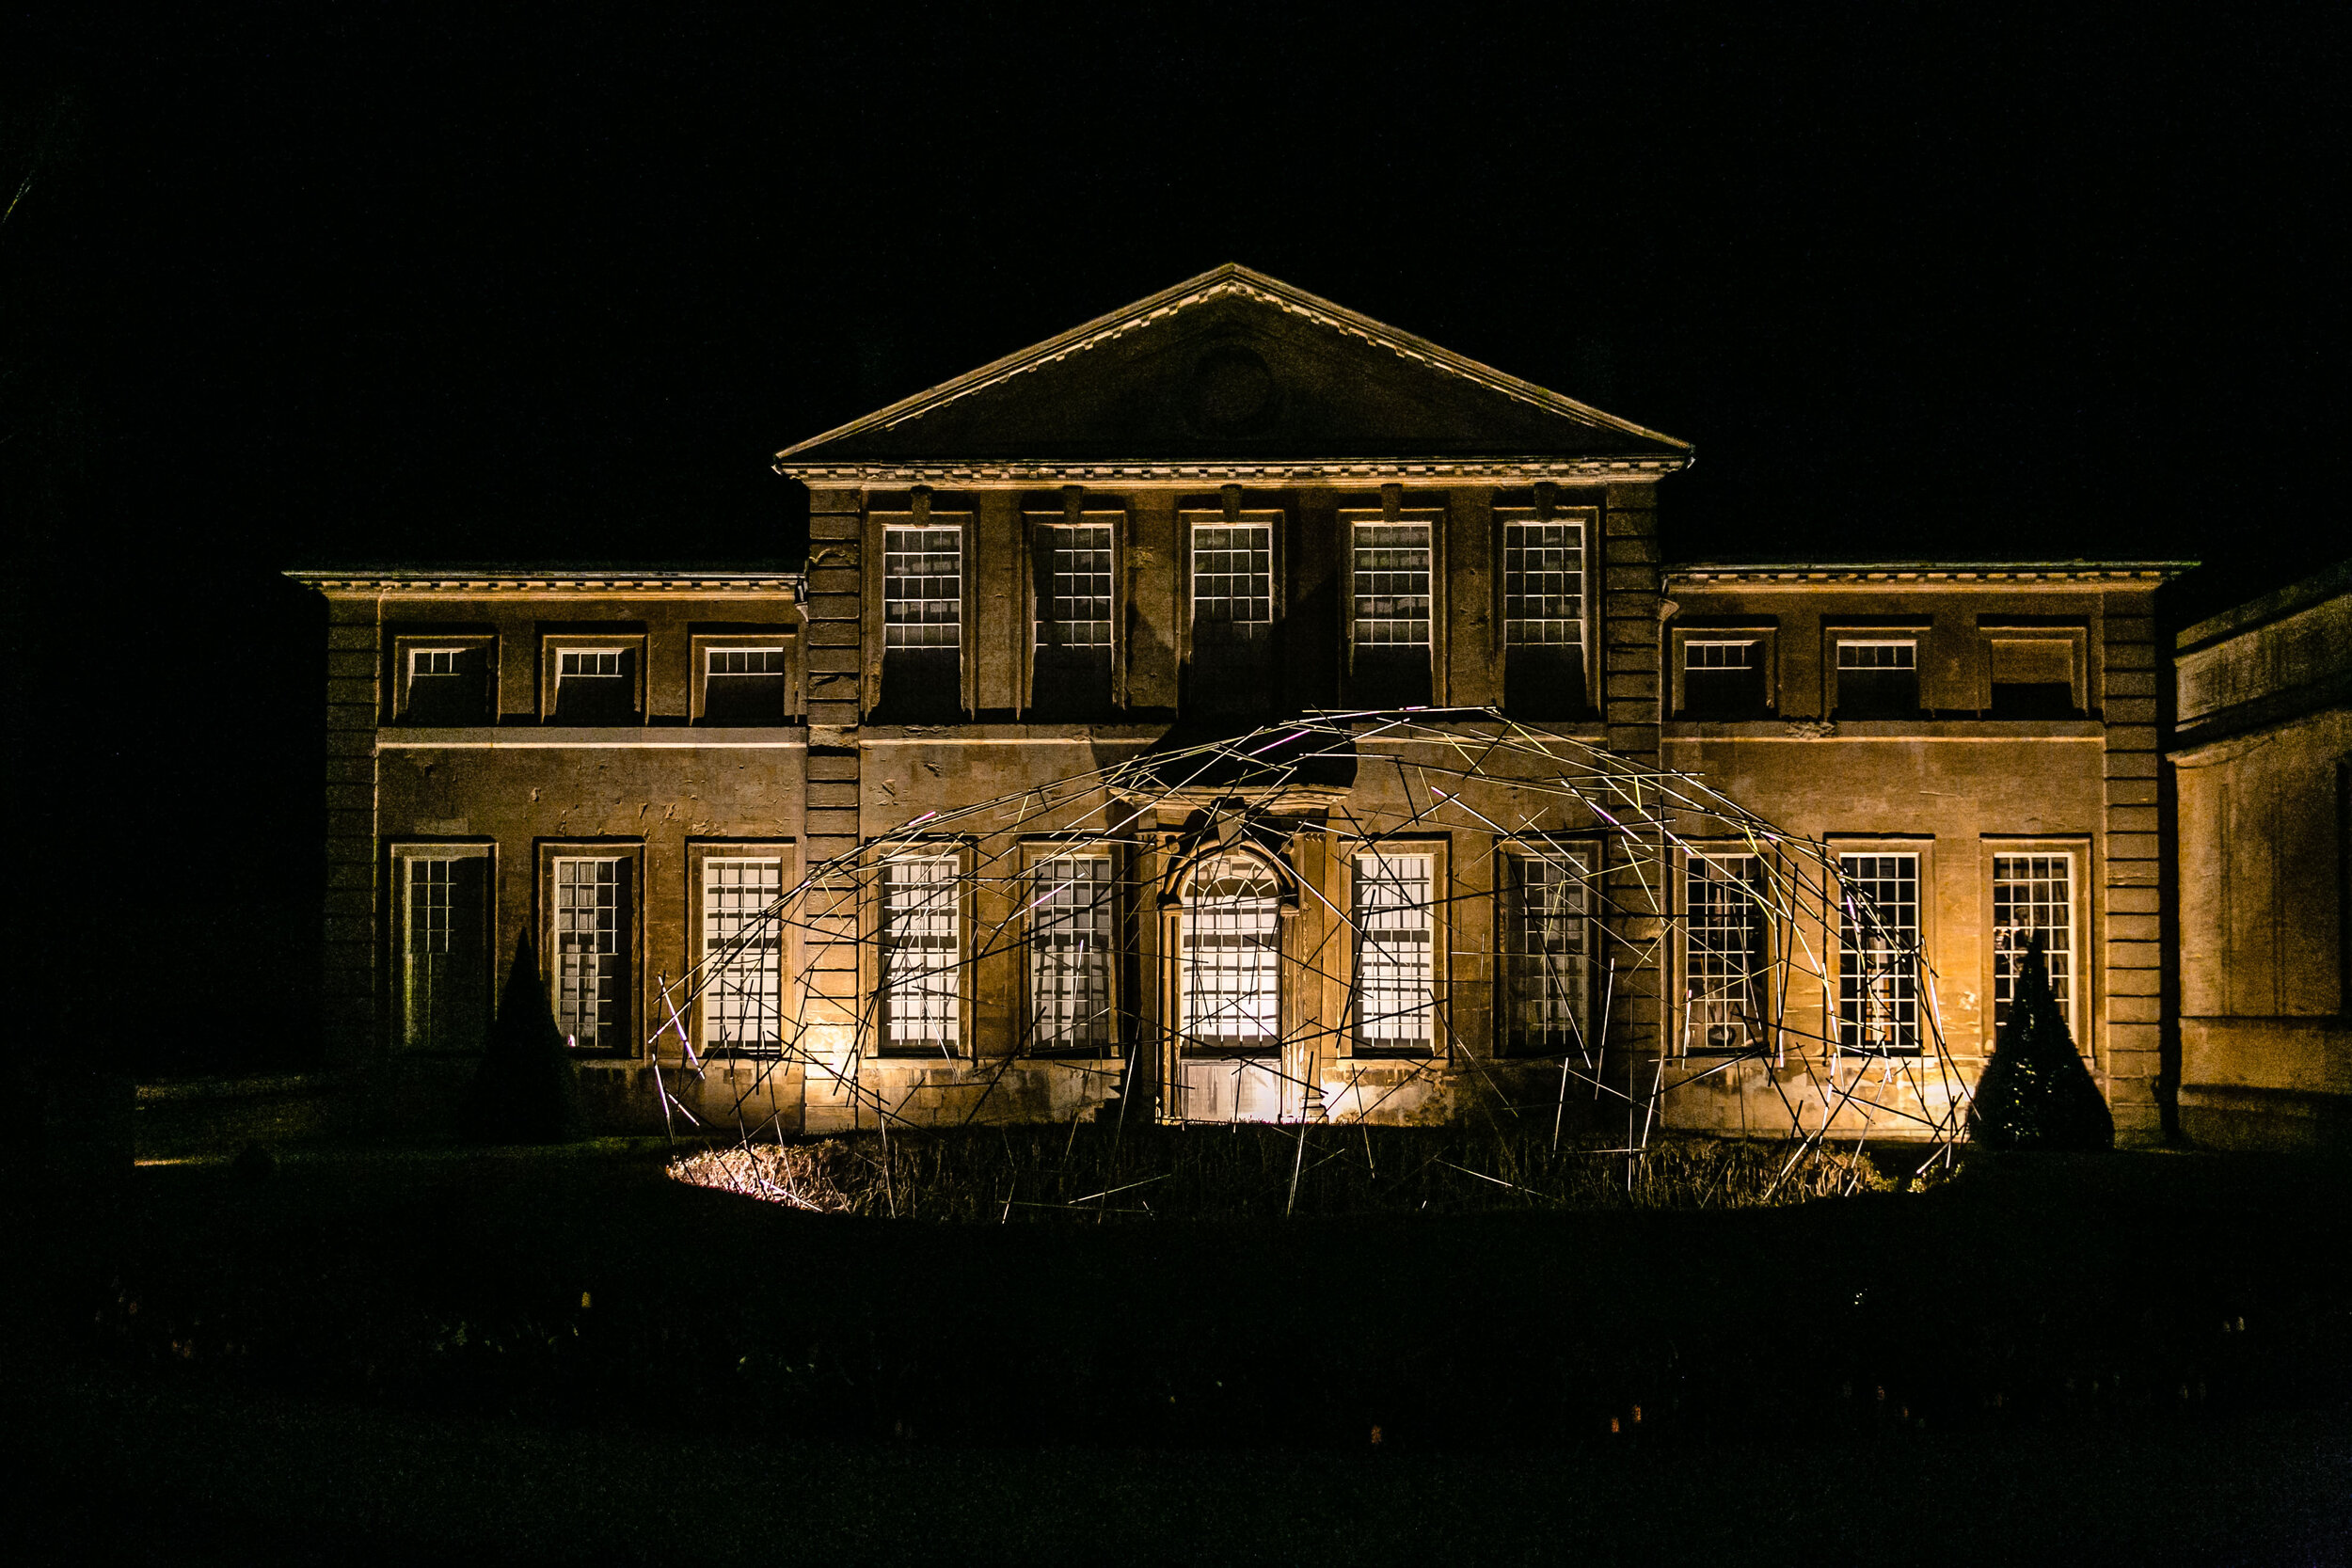 night photograph of Aynhoe Park lit up from outside